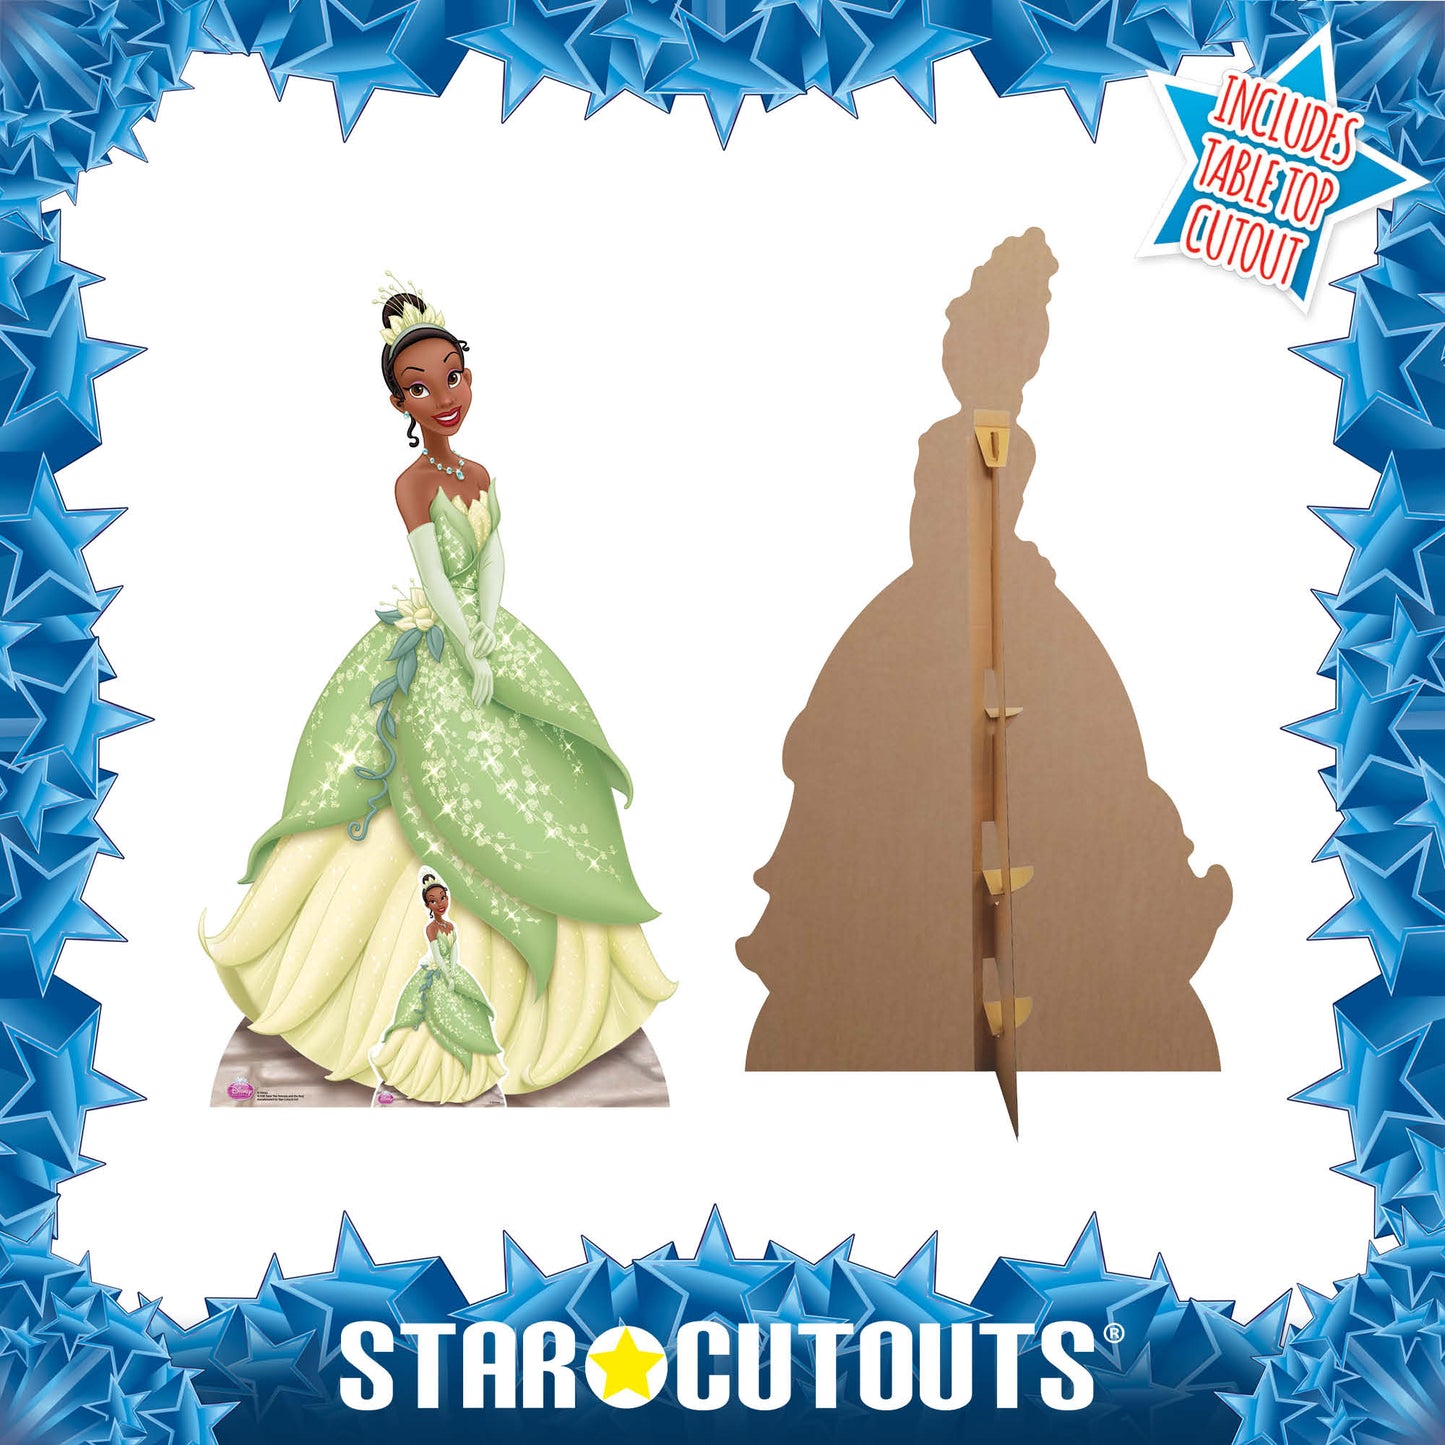 SC558 Tiana Cardboard Cut Out Height 173cm